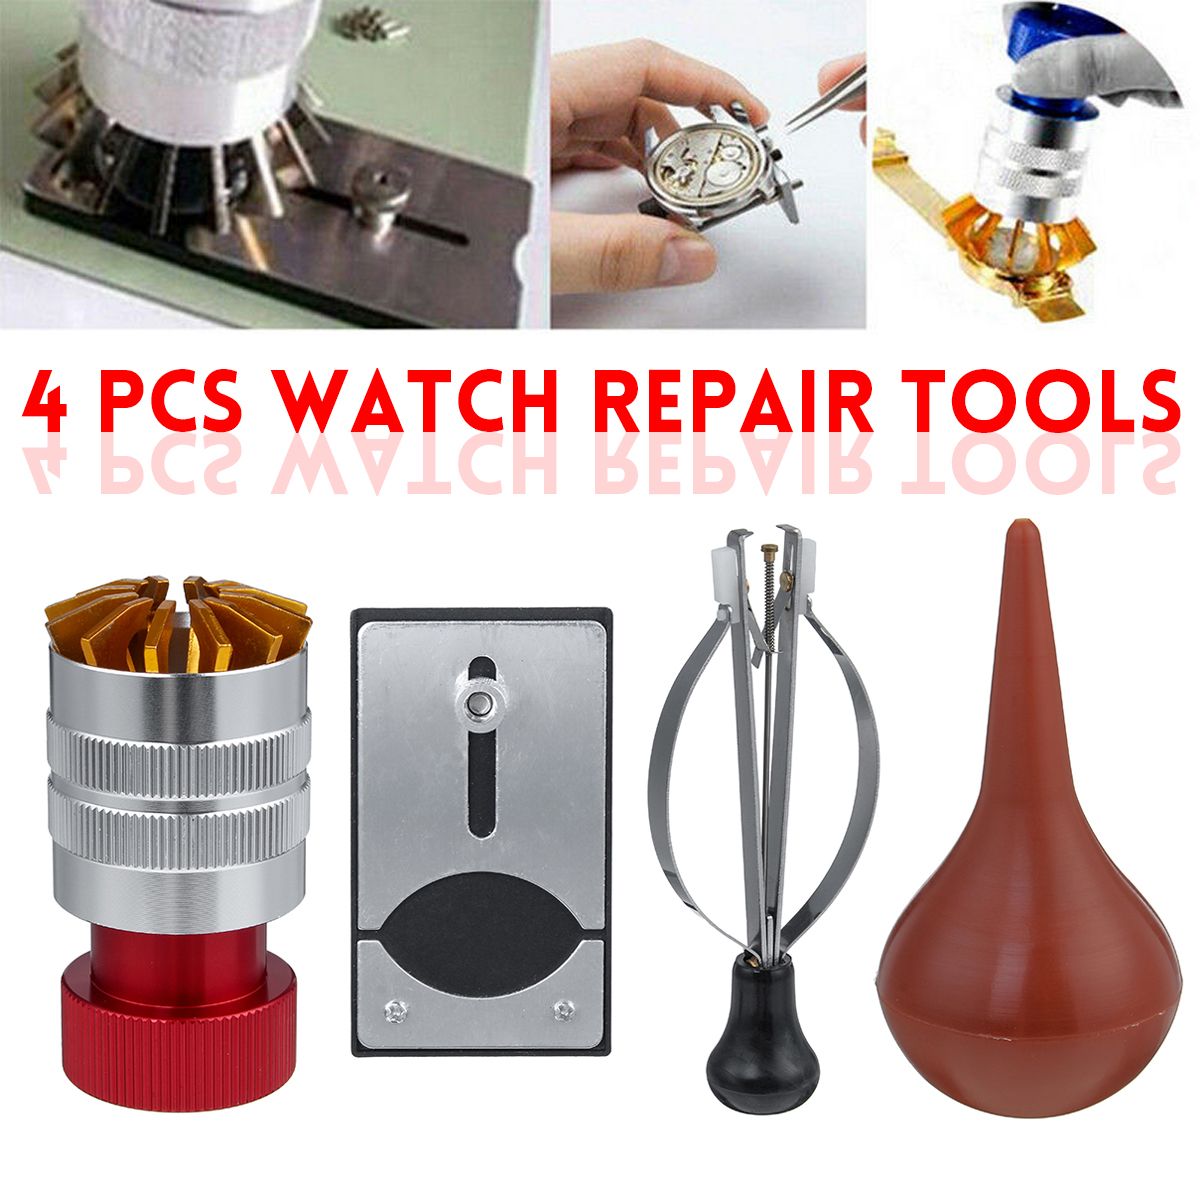 4Pcs-Watch-Front-Case-Remover-Glass-Crystal-Lift-Remove-Replace-Repair-Tools-Kit-1644193